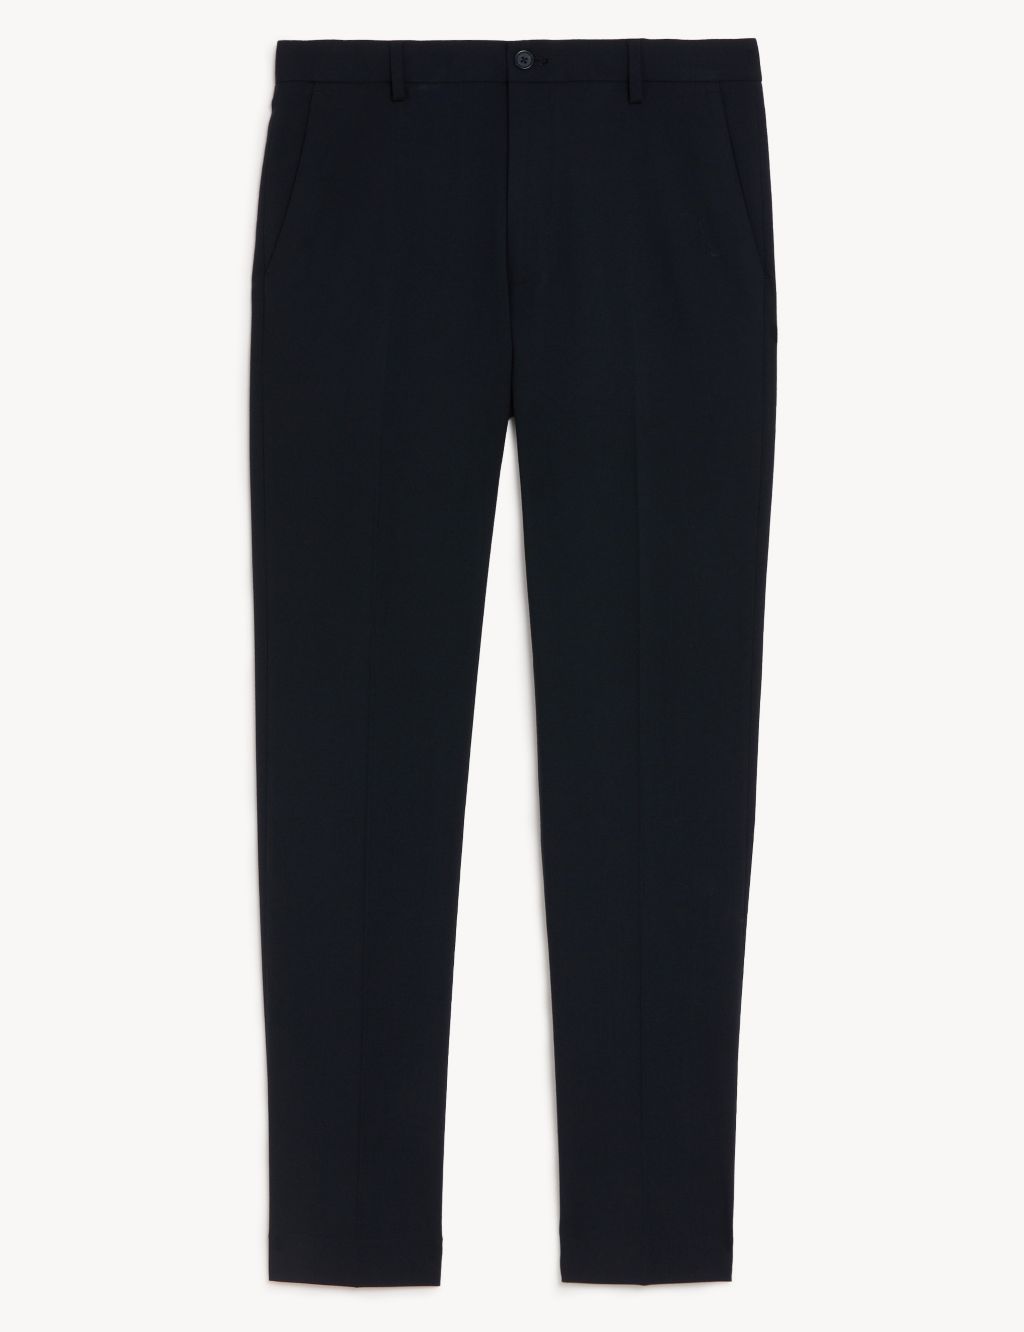 Tailored Fit Flat Front Stretch Trousers image 7